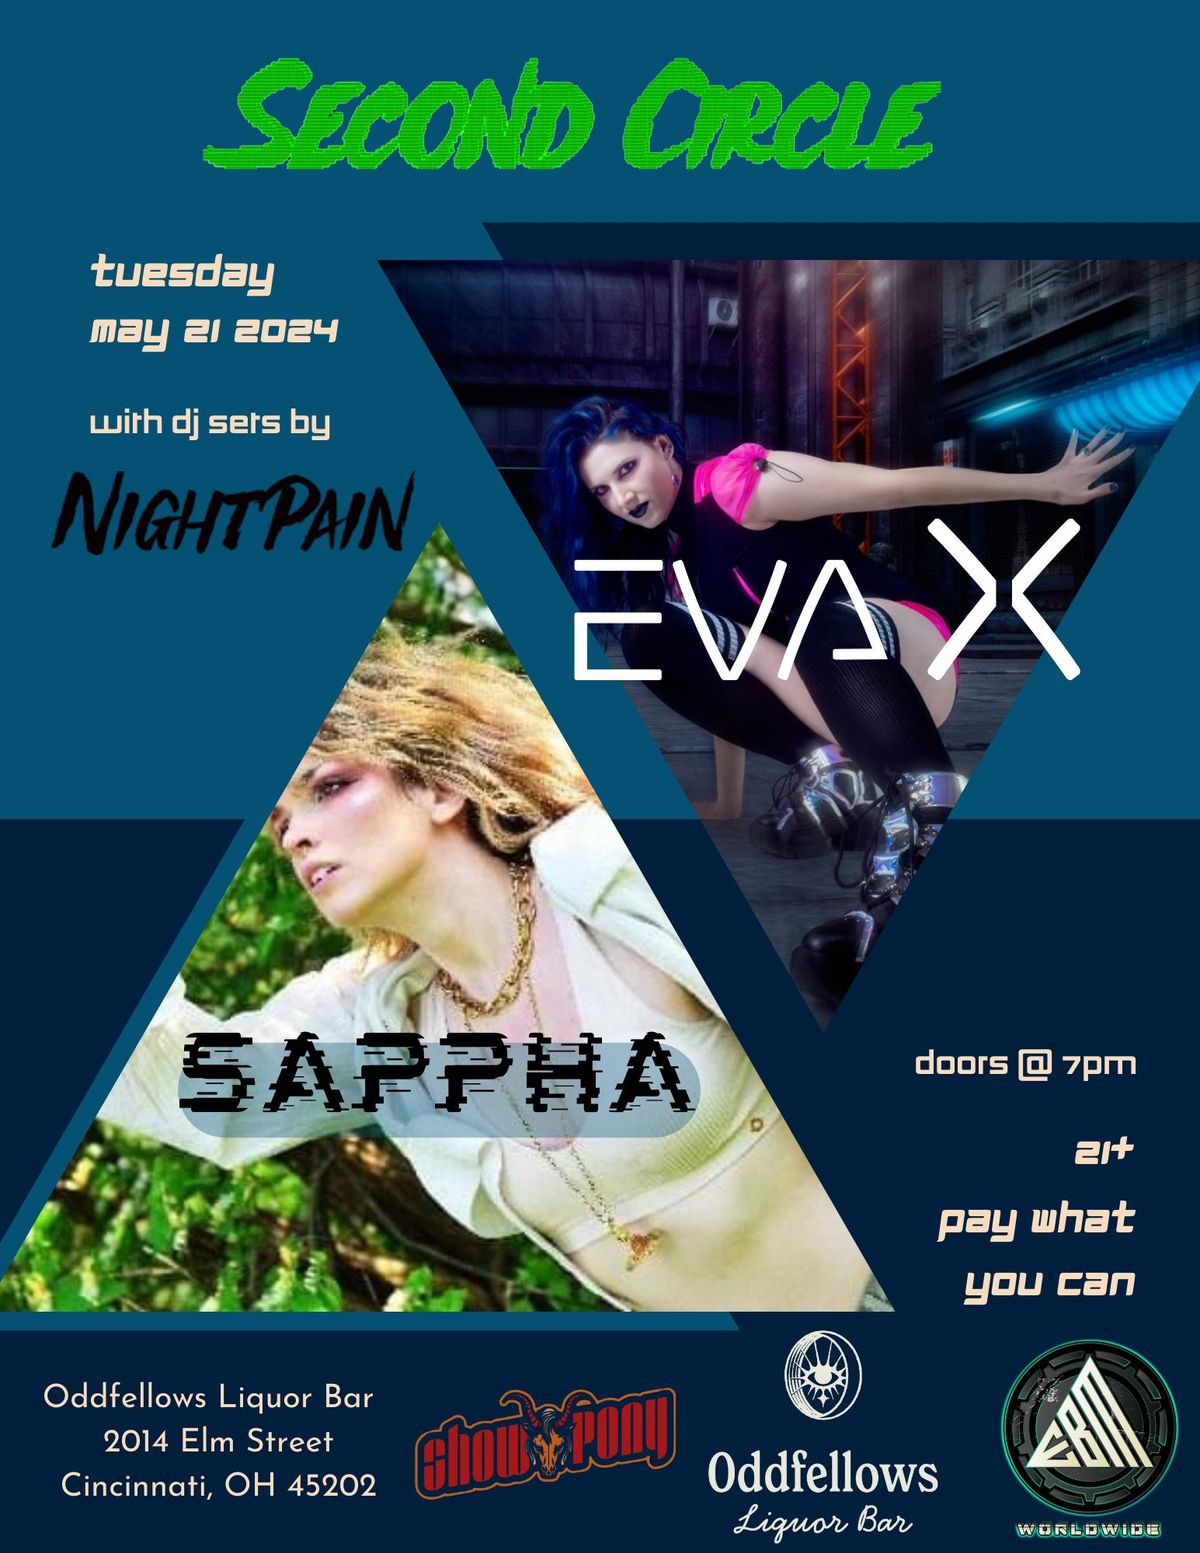 Eva X and Sappha Live with DJ Sets from Nightpain presented by Second Circle